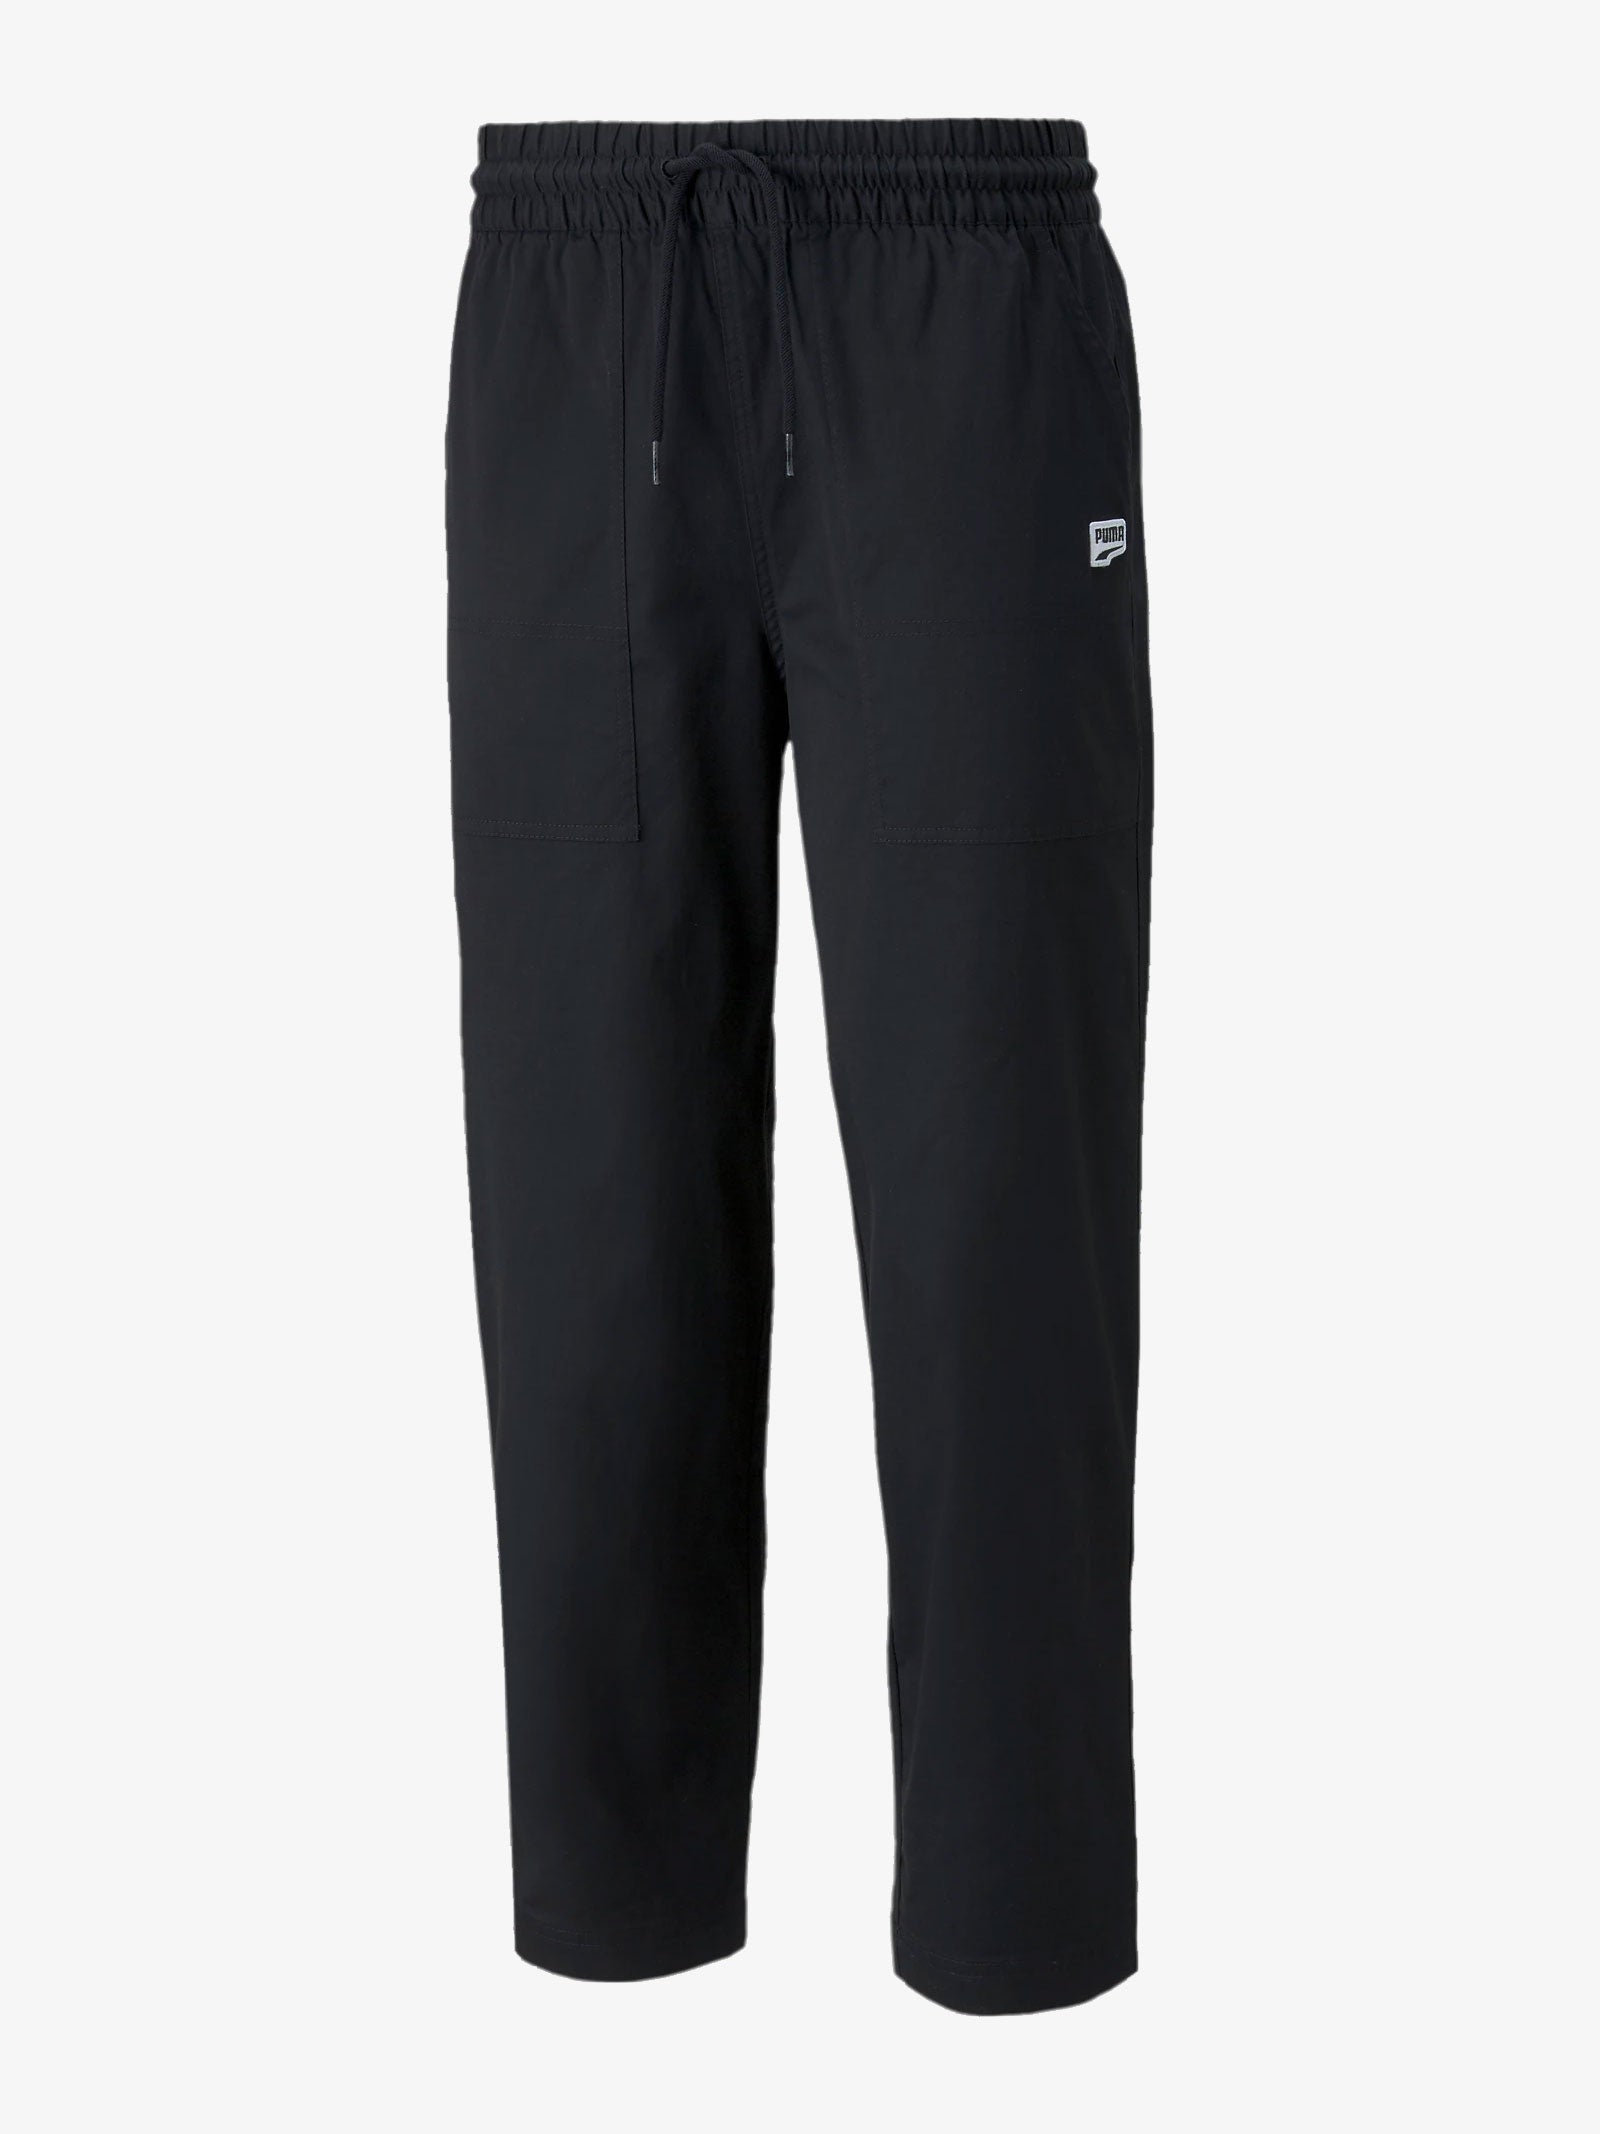 PUMA Men's Downtown Twill Tapered Trousers